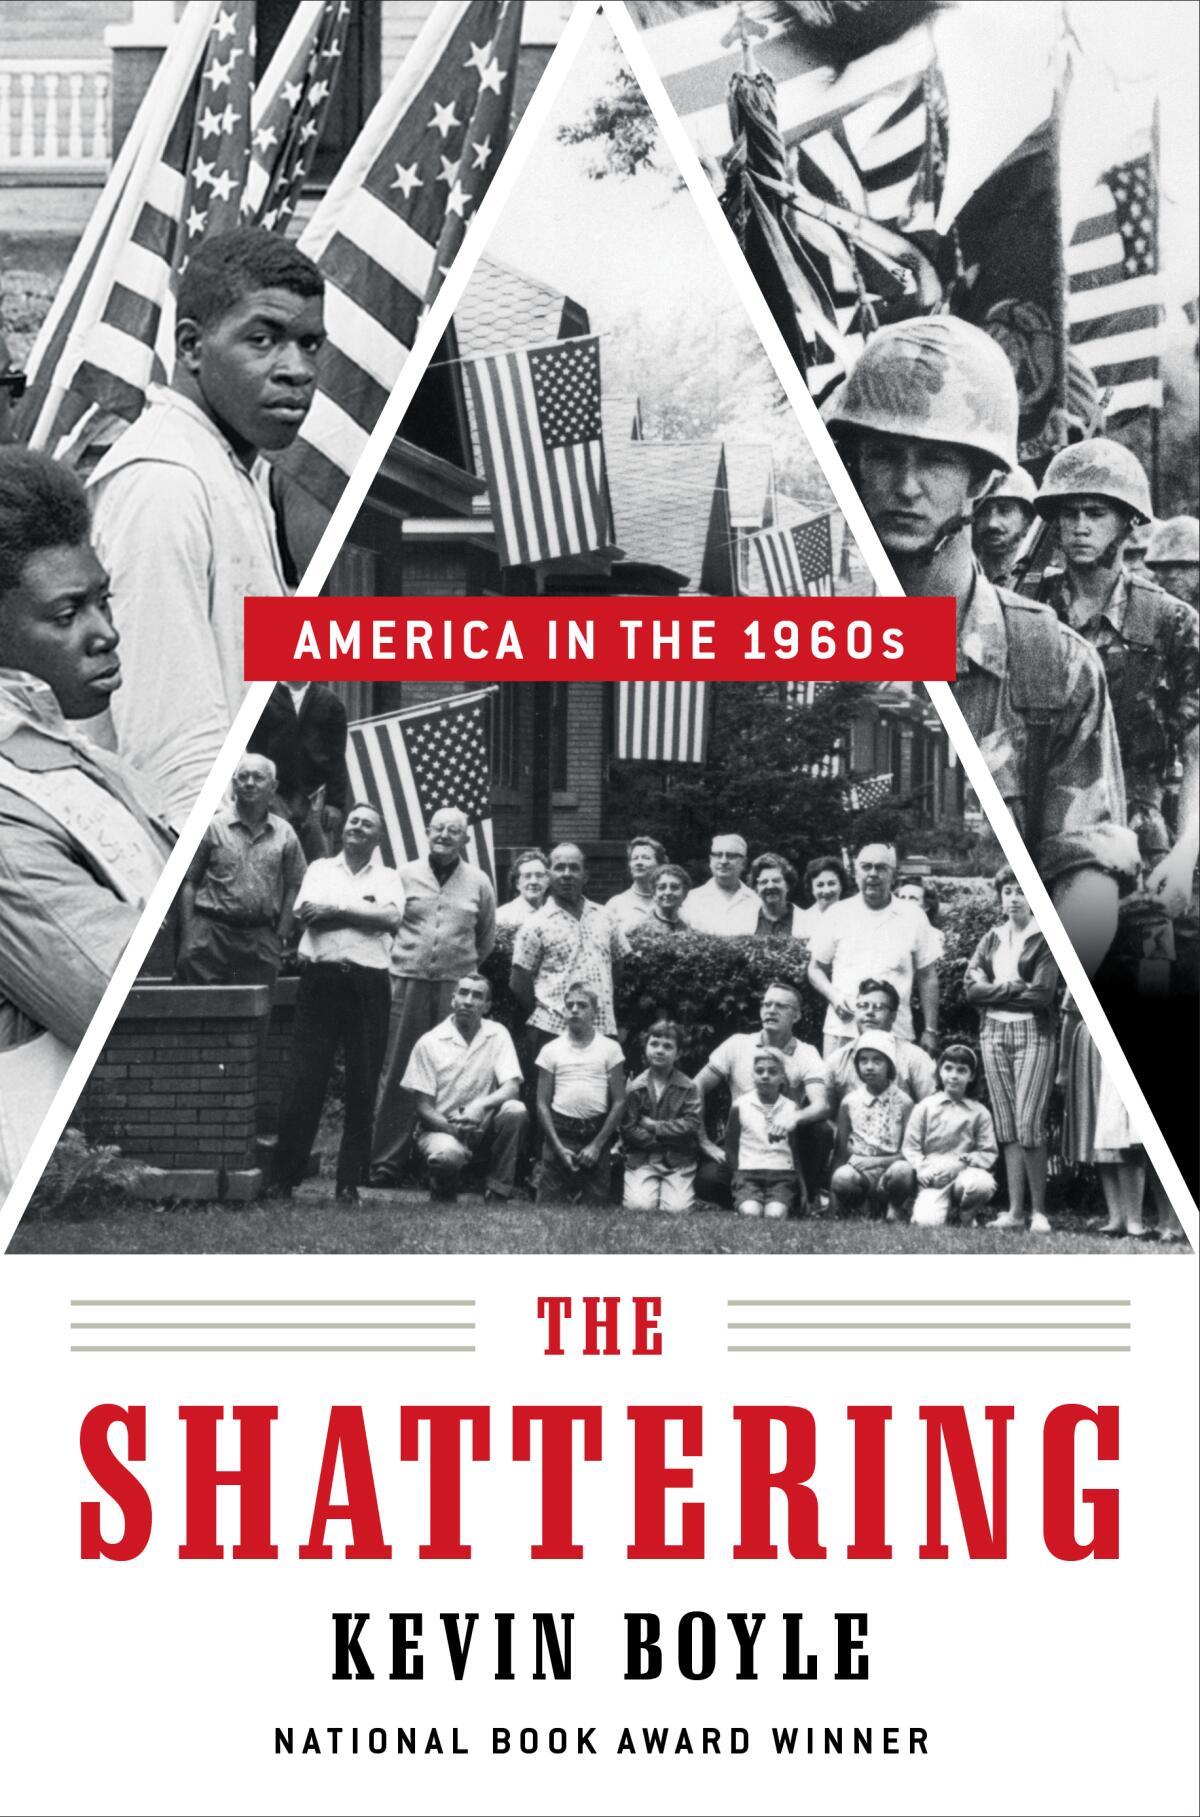 Book cover for "The Shattering" has various black-and-white images 